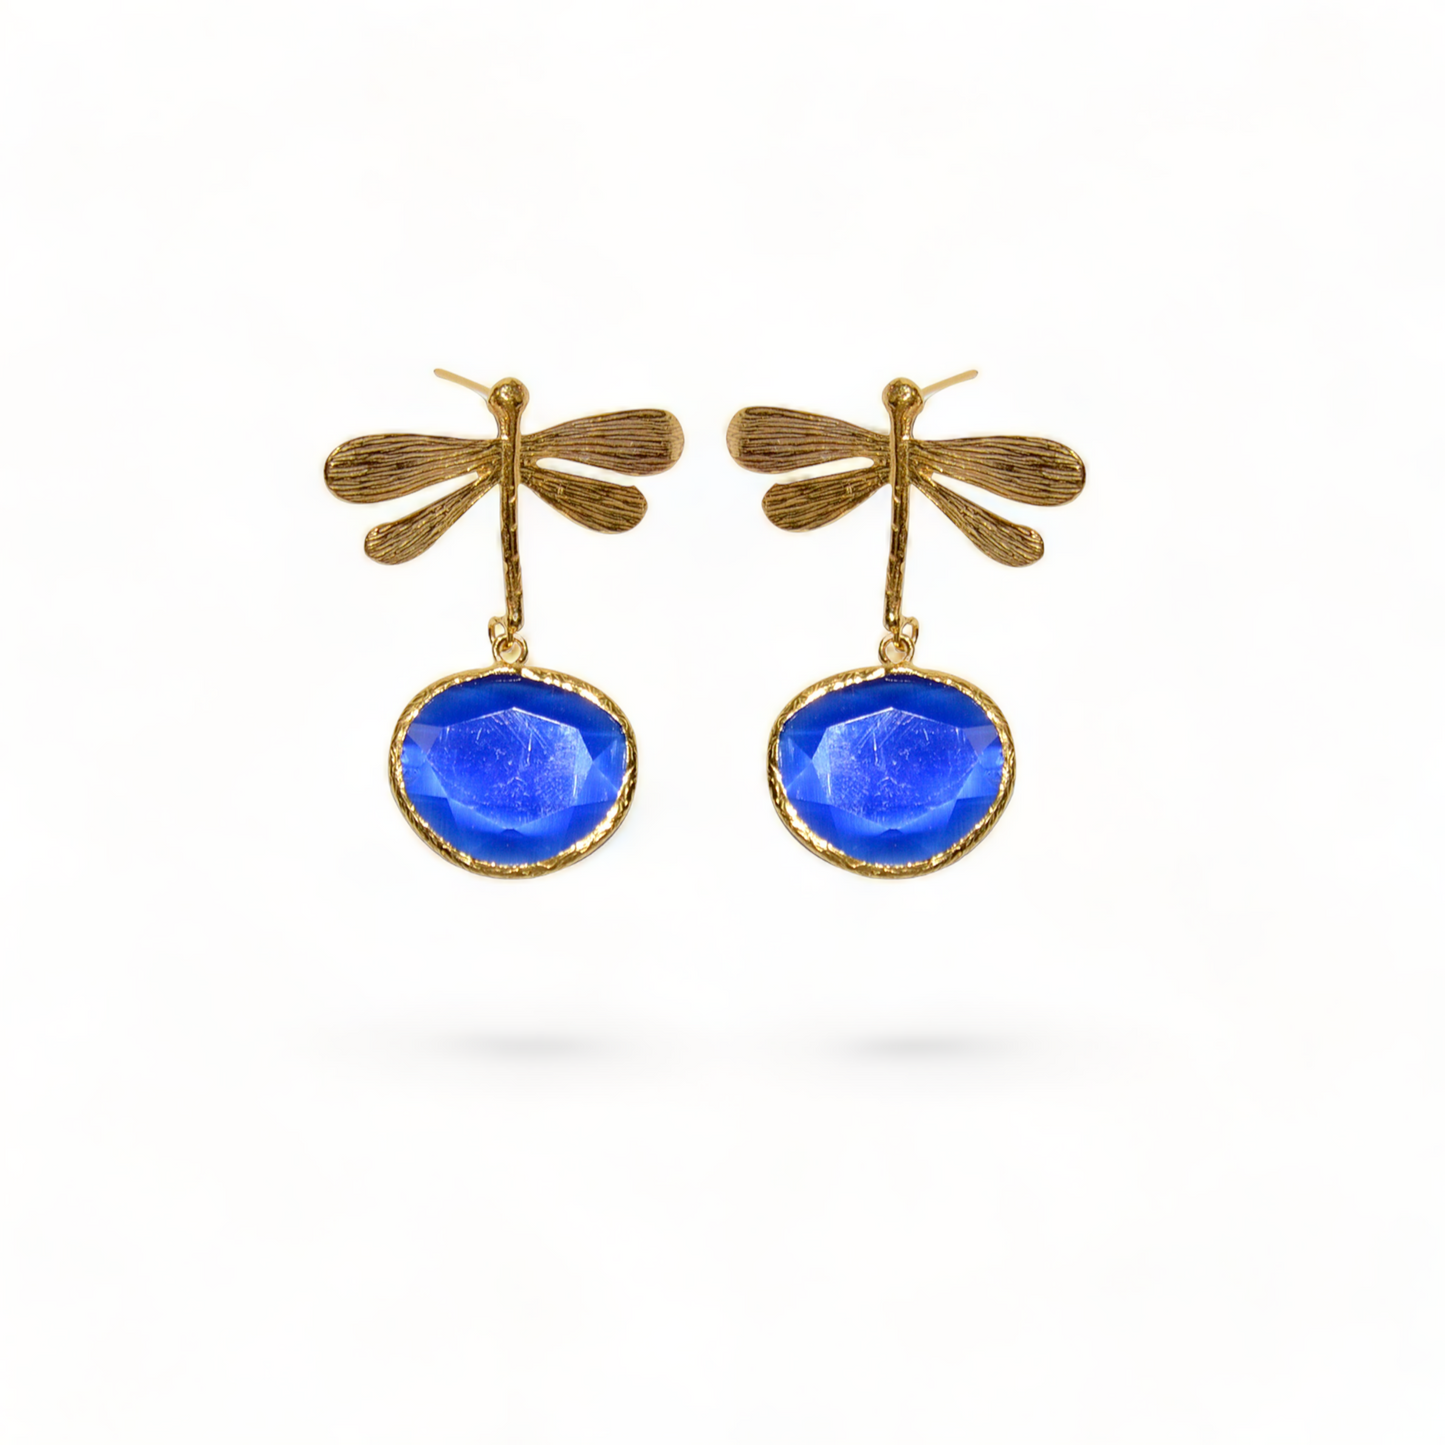 Handmade Gold-Plated Dragonfly Earrings | Blue Cat Eye Stone | Artisan Crafted Jewelry | Unique Drop Earring - shopzeyzey